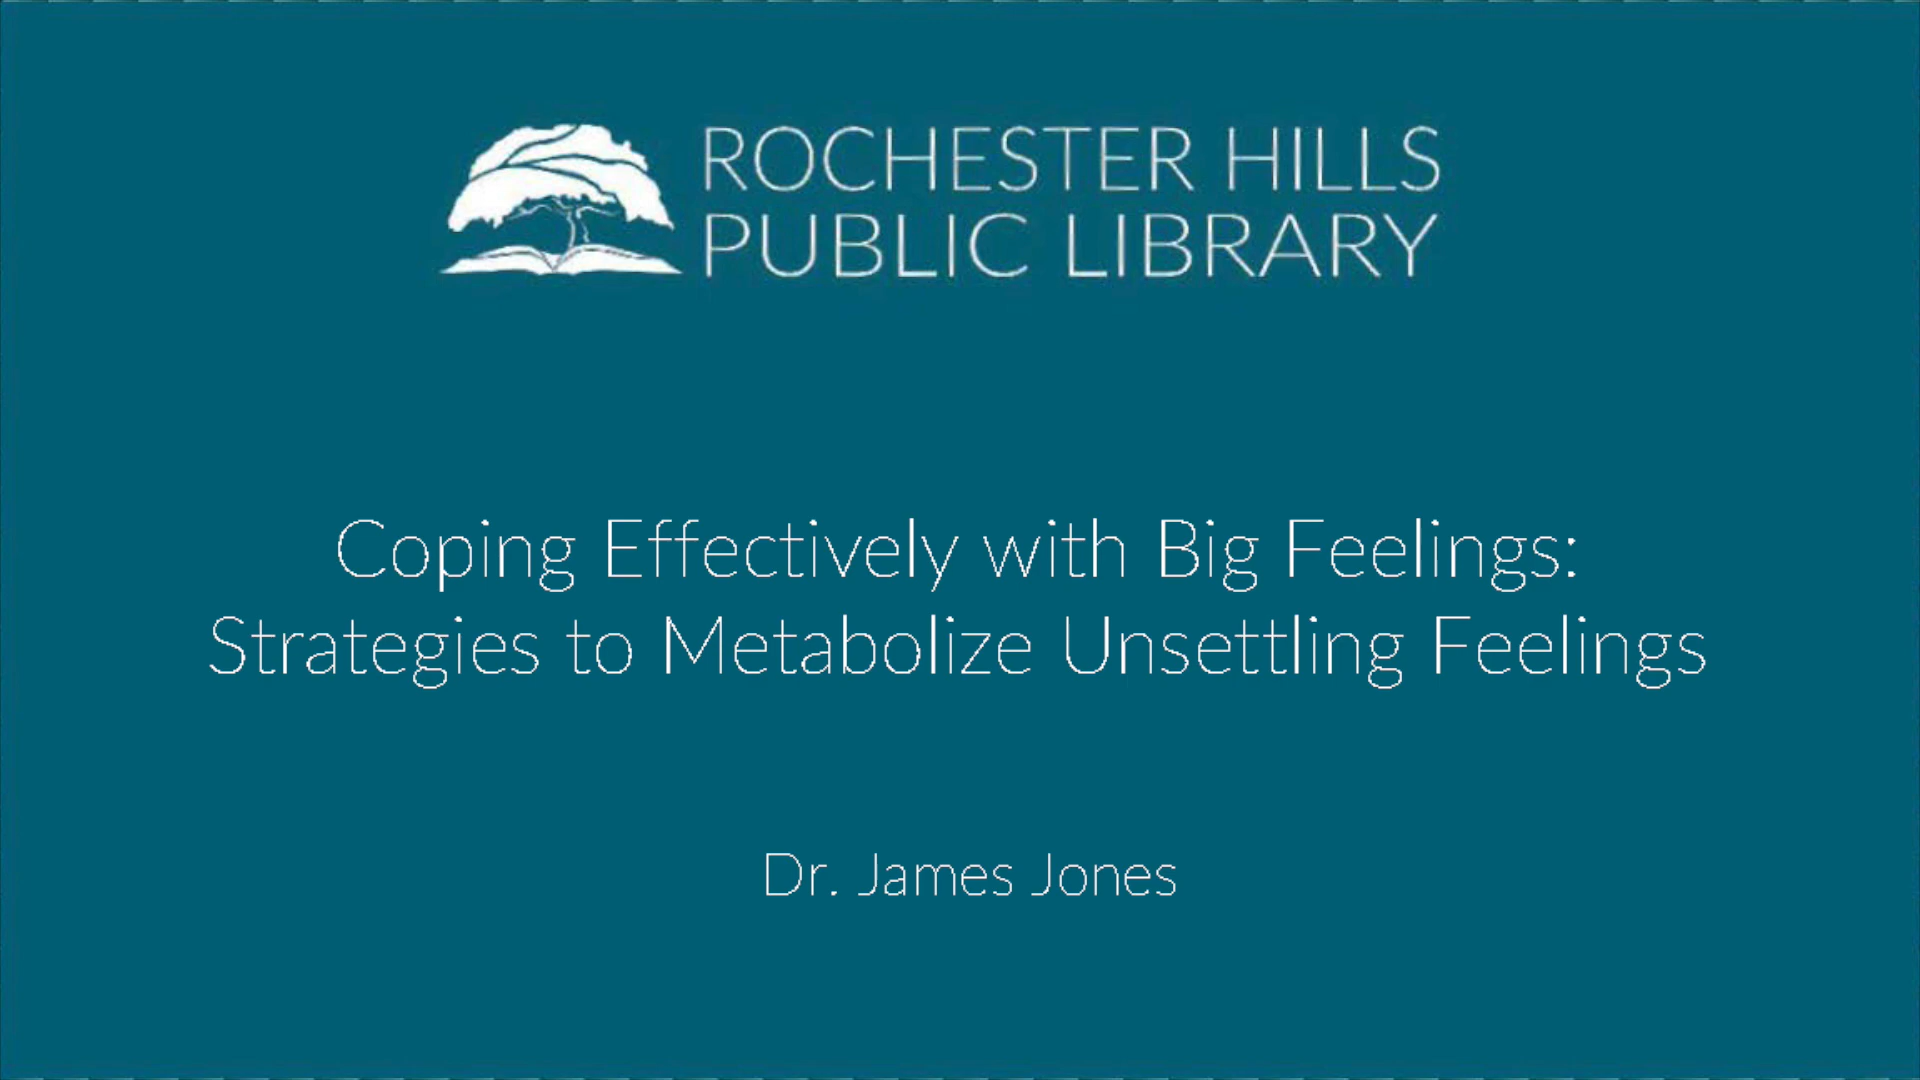 Coping Effectively with Big Feelings: Strategies to Metabolize Unsettling Feelings